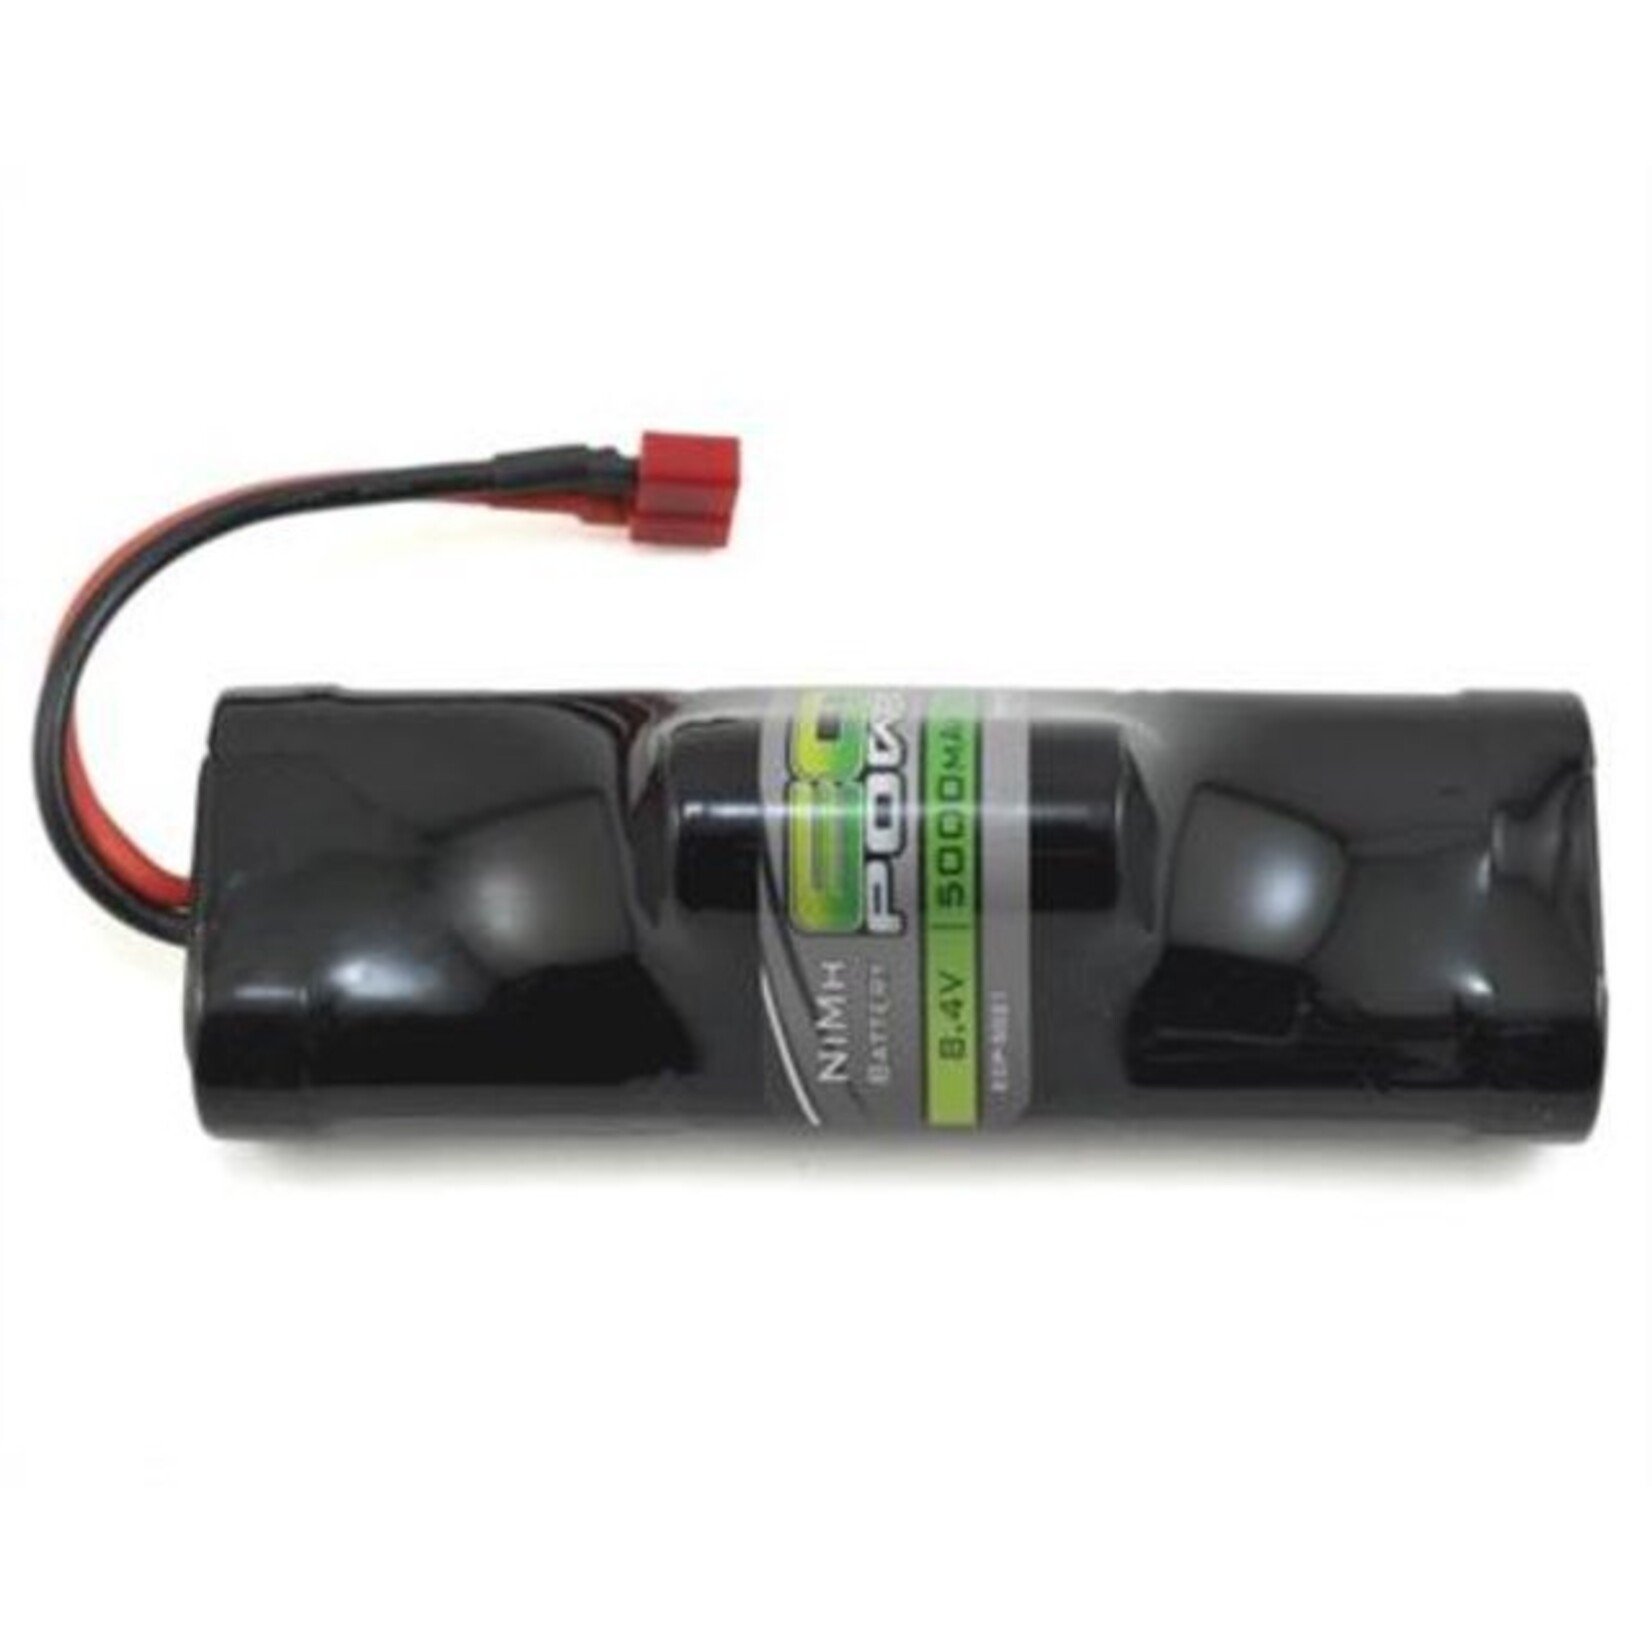 EcoPower ECP-5021 EcoPower 7-Cell NiMH Hump Battery Pack w/T-Style Connector (8.4V/5000mAh)